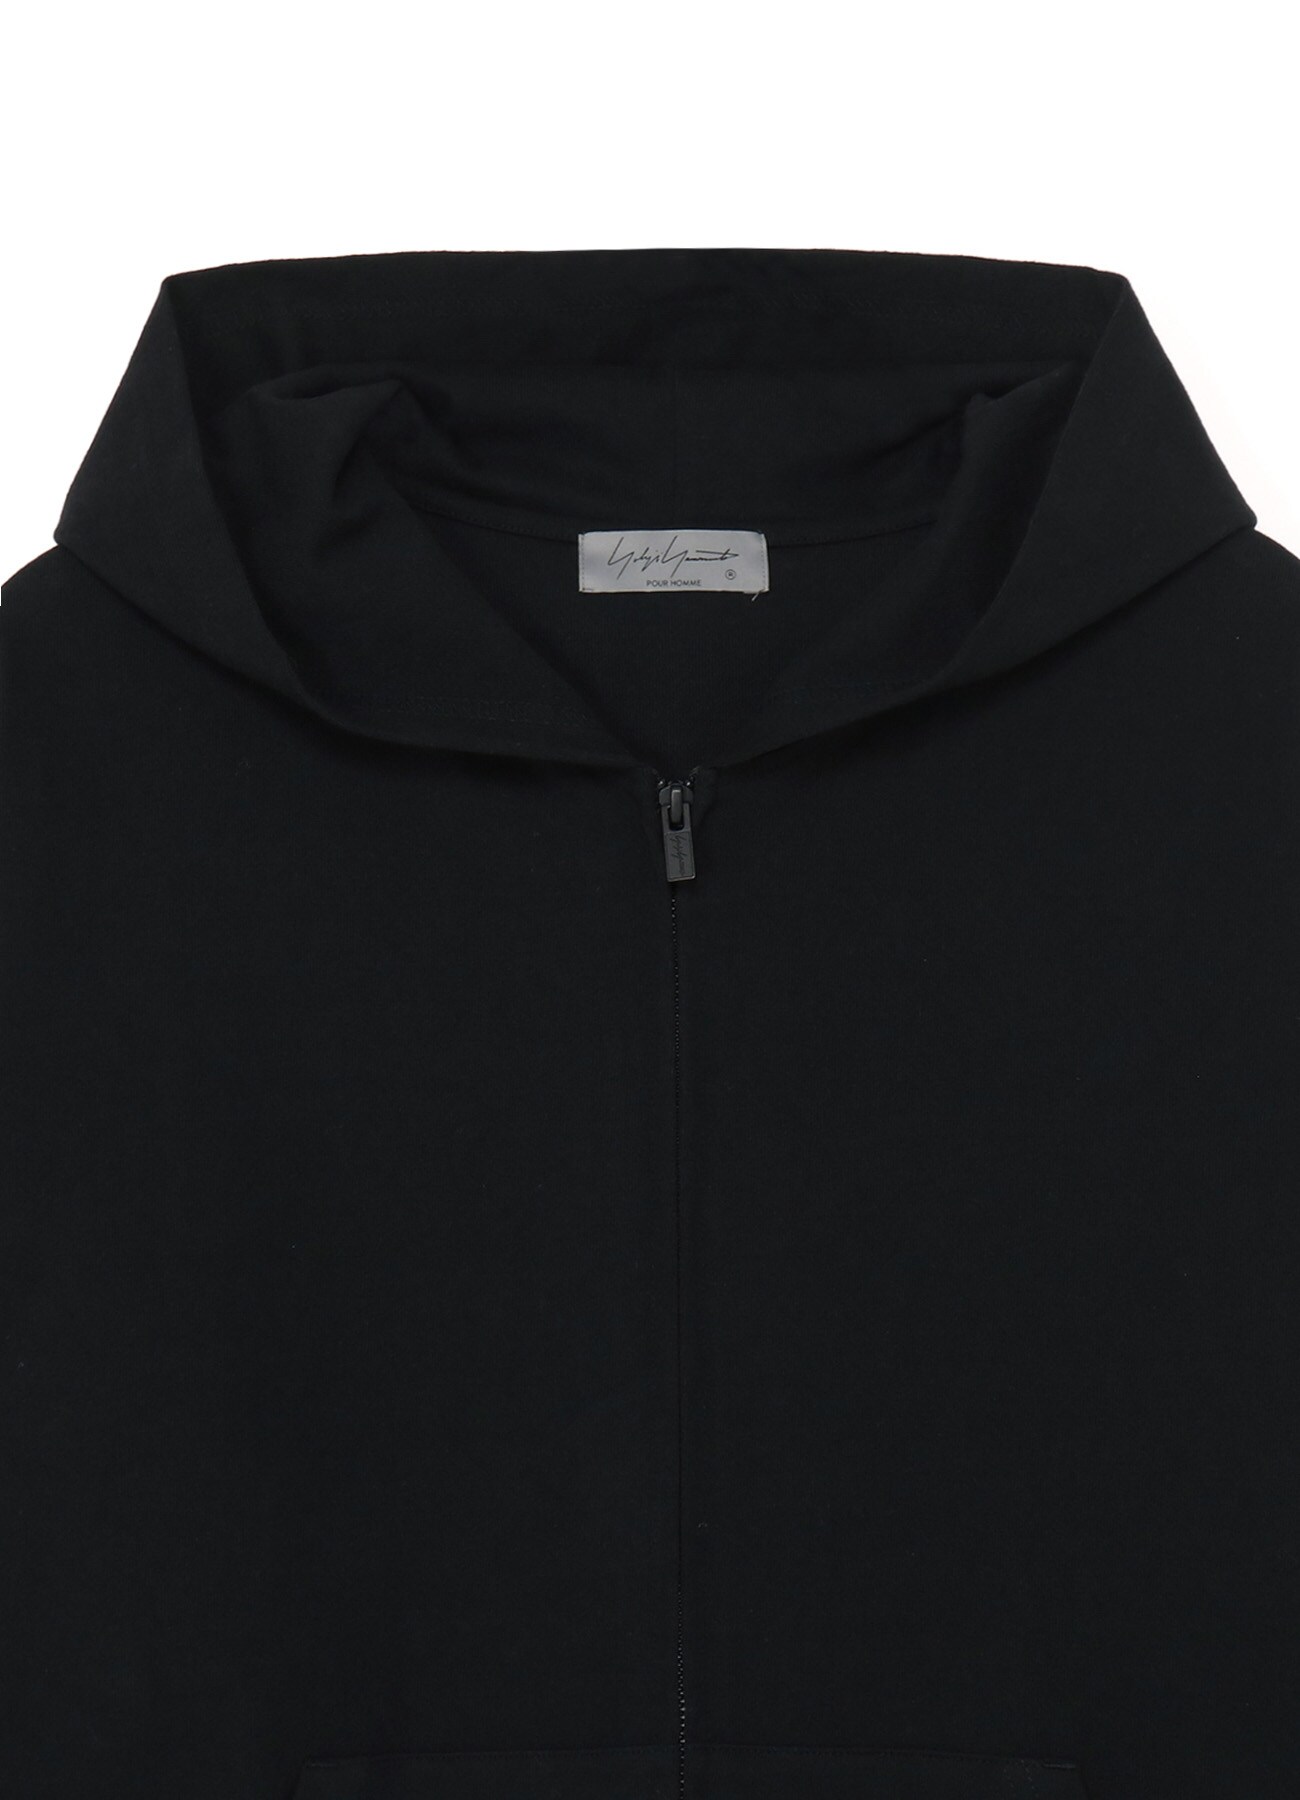 HEAVY WEIGHT JERSEY HOODIE WITH ARMPIT GUSSETS